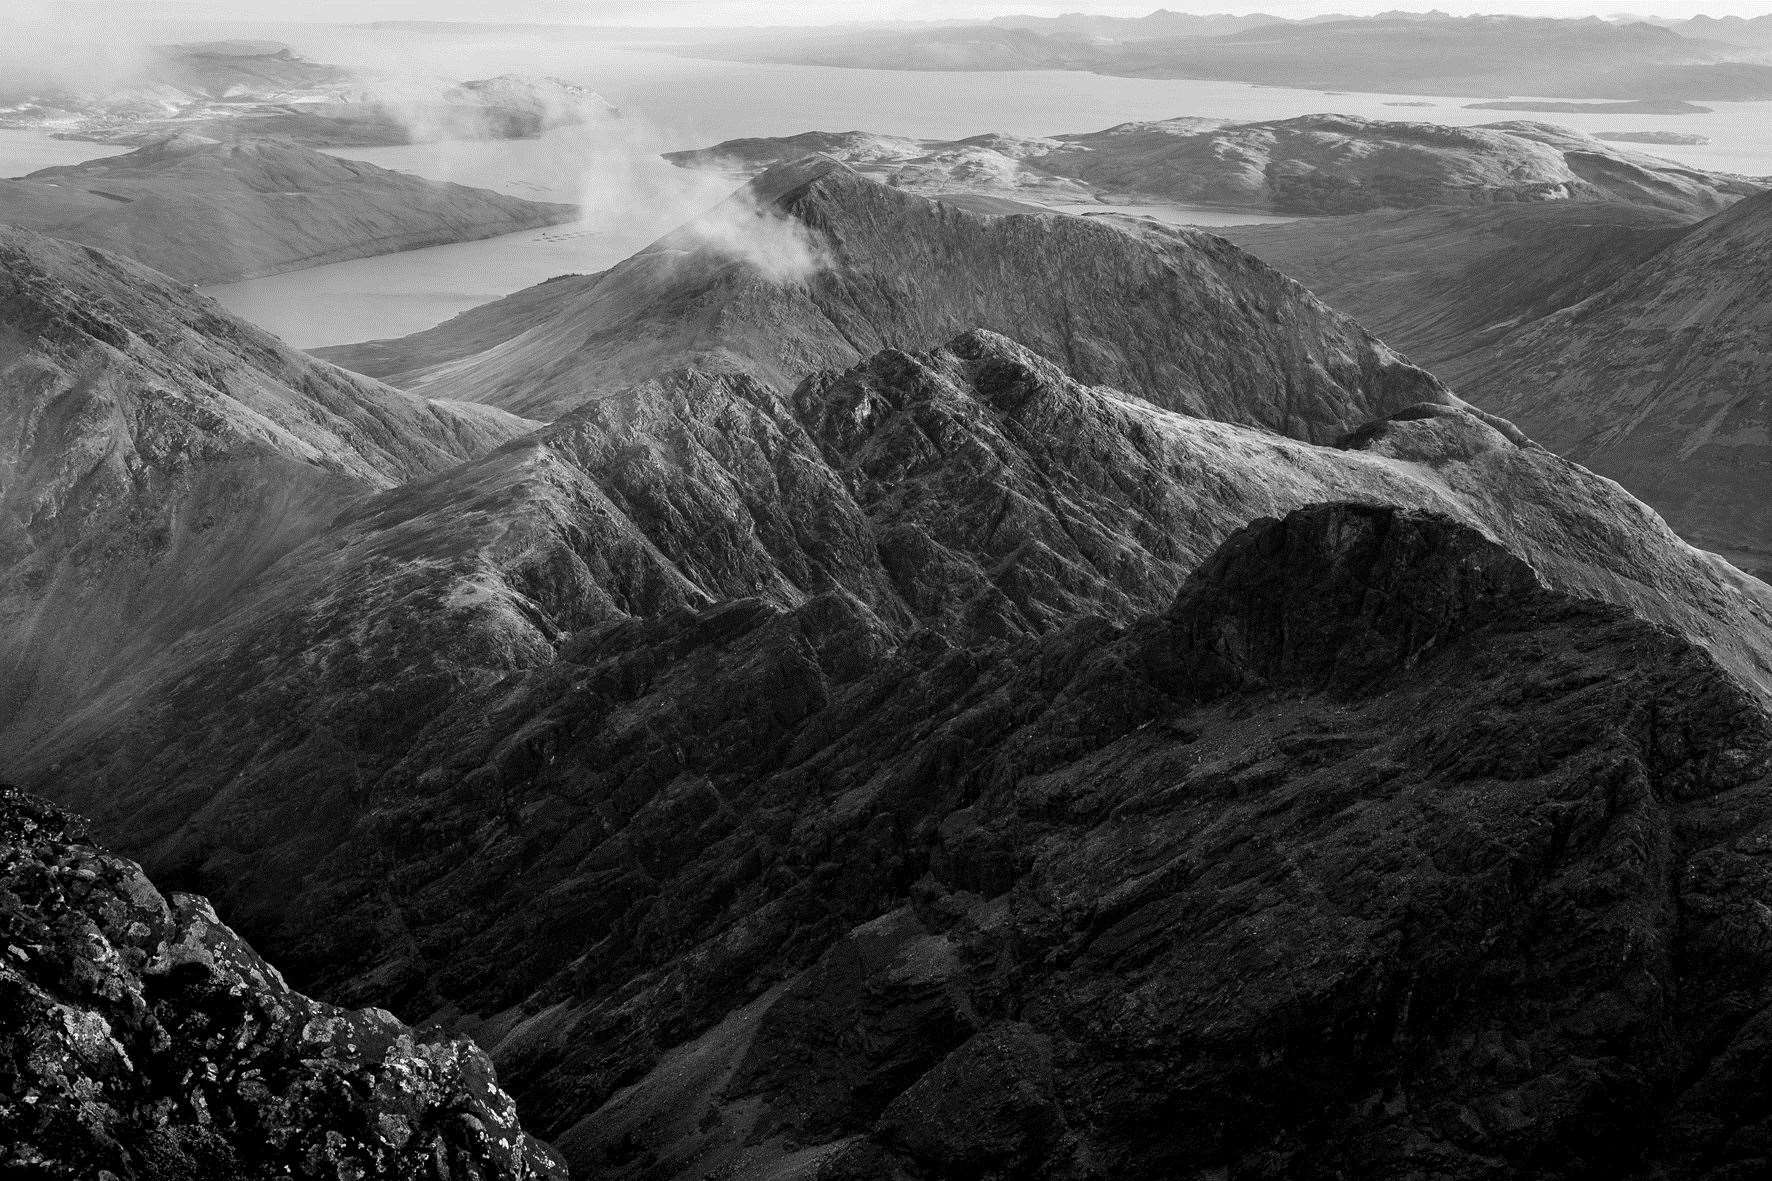 Ancient Ridges was captured at the summit of Bla Bheinn early in the morning and features the Inner Sound of Skye in the distance. Picture: Gavin Shand